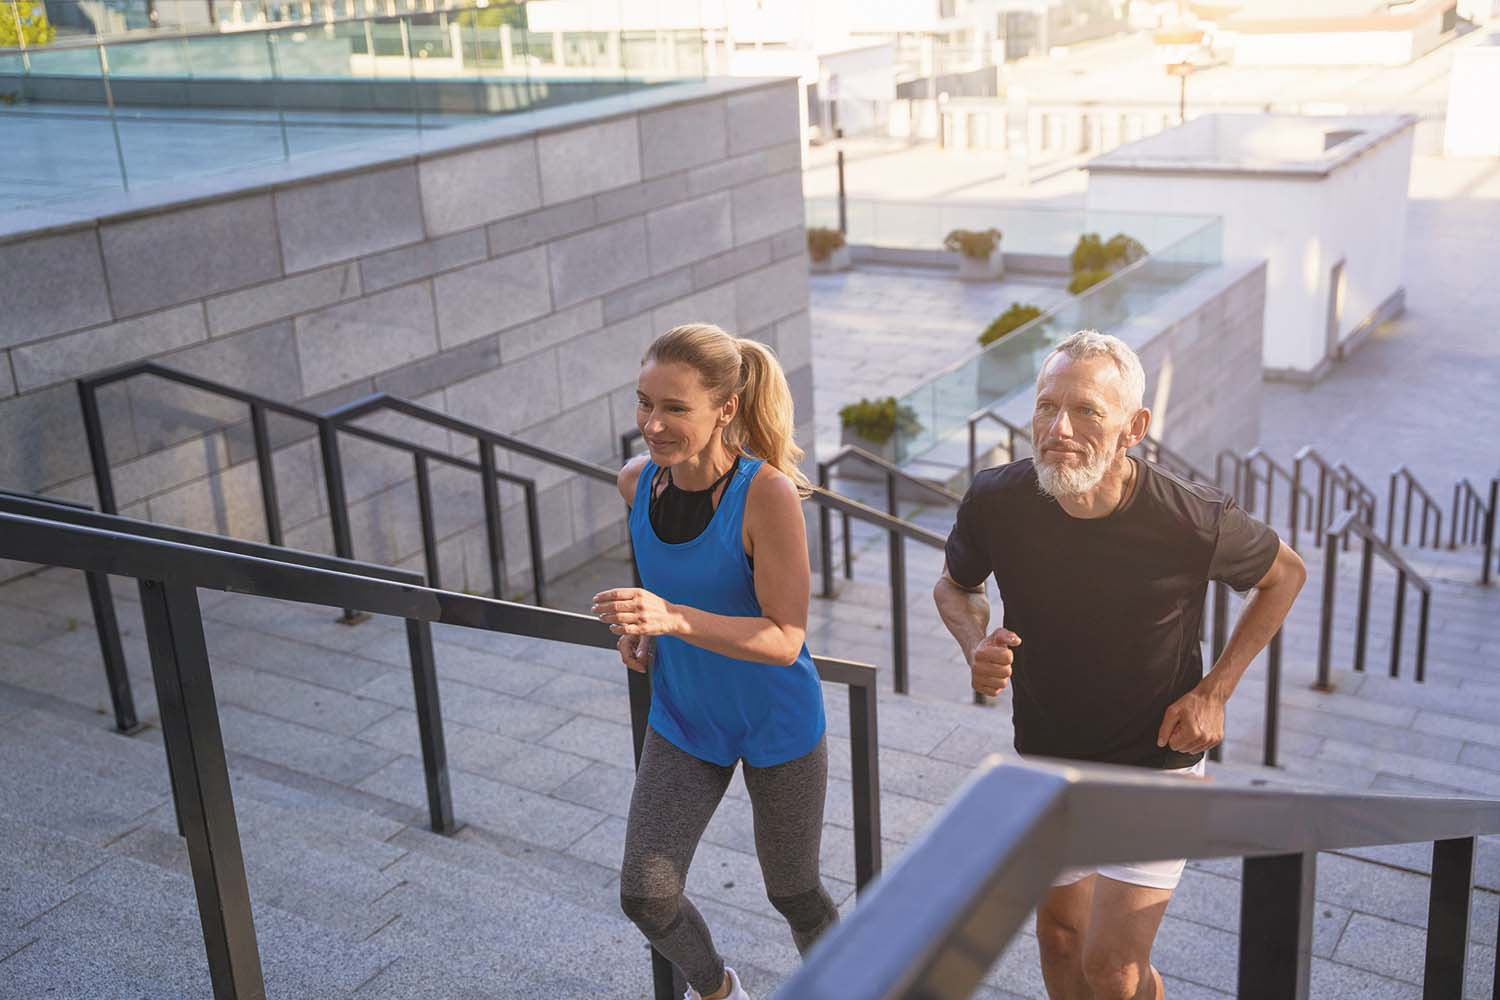 photo of a woman and a man exercising by running up stairs from an outdoor plaza